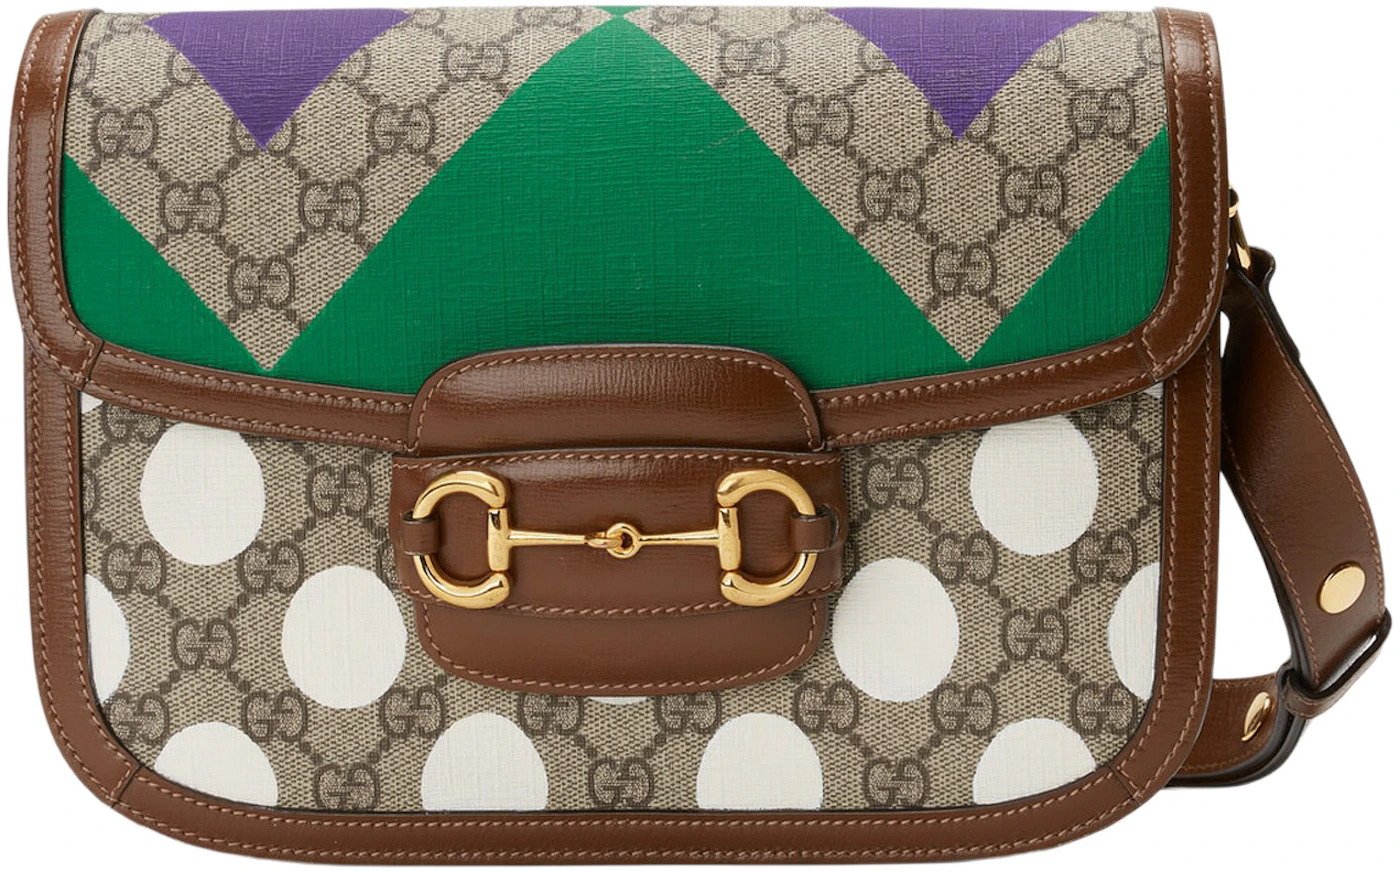 Sold at Auction: Gucci, Gucci - Golf tee holder bag